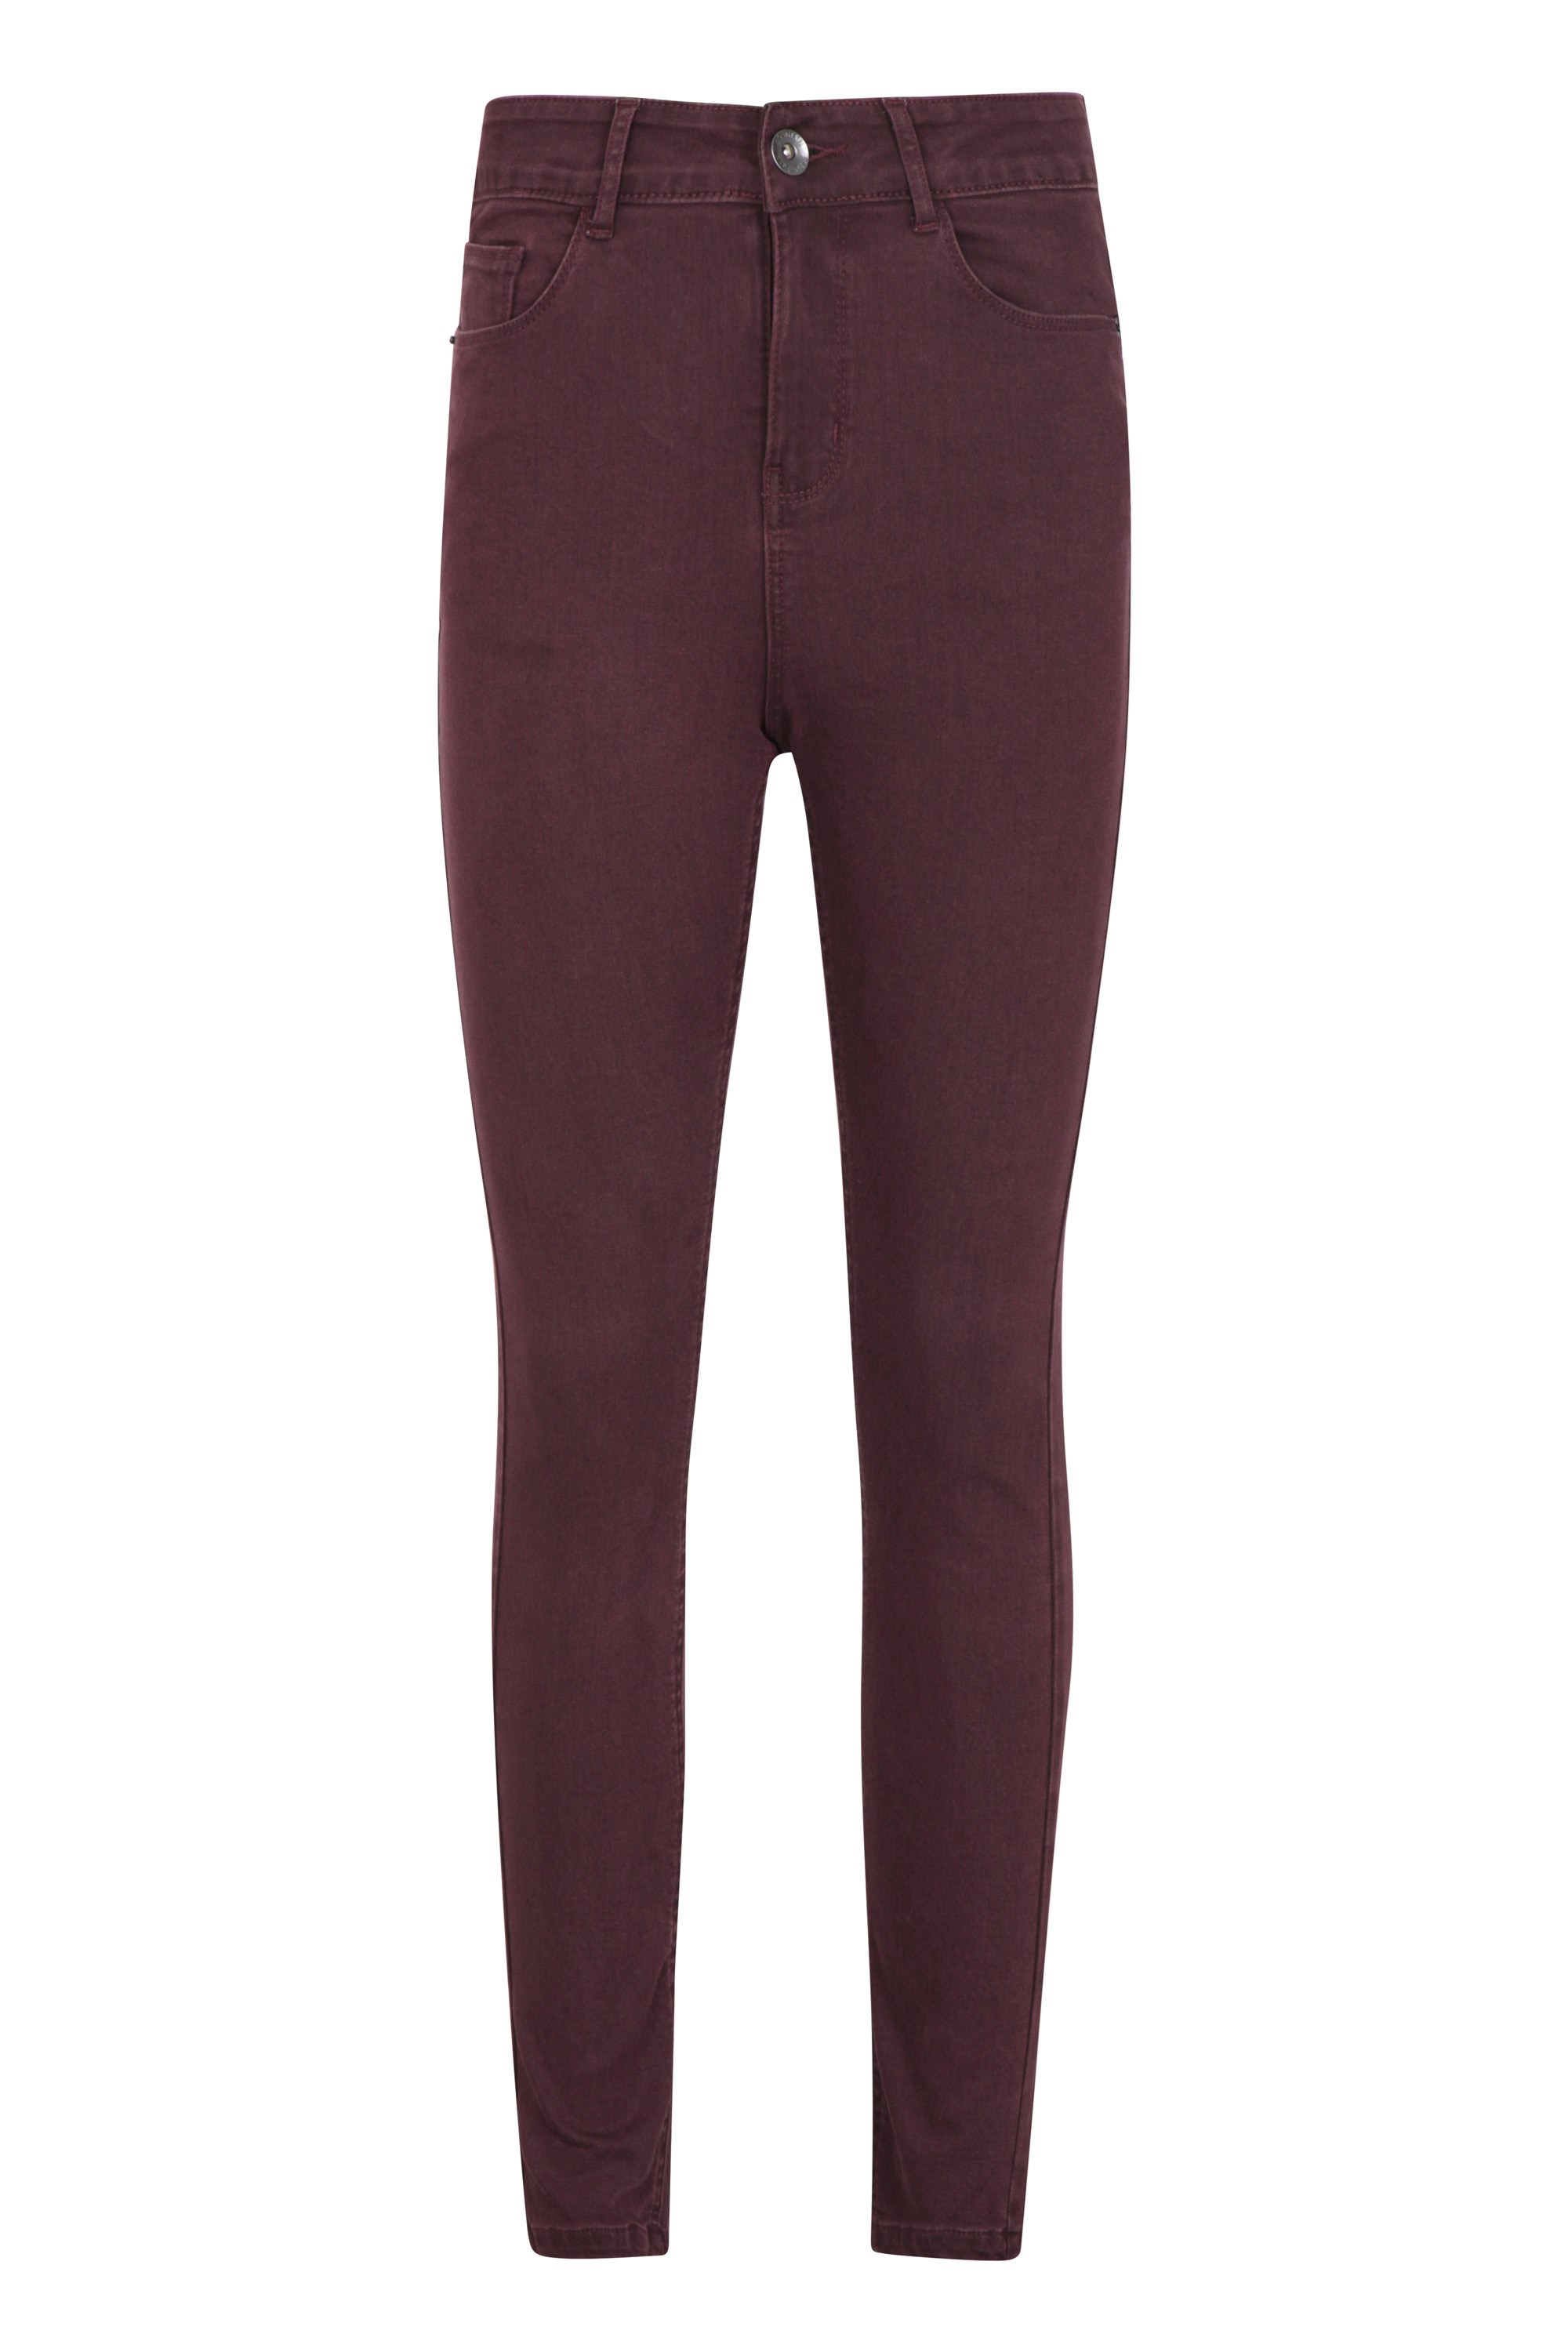 Casual Womens Stretch Trousers - Burgundy